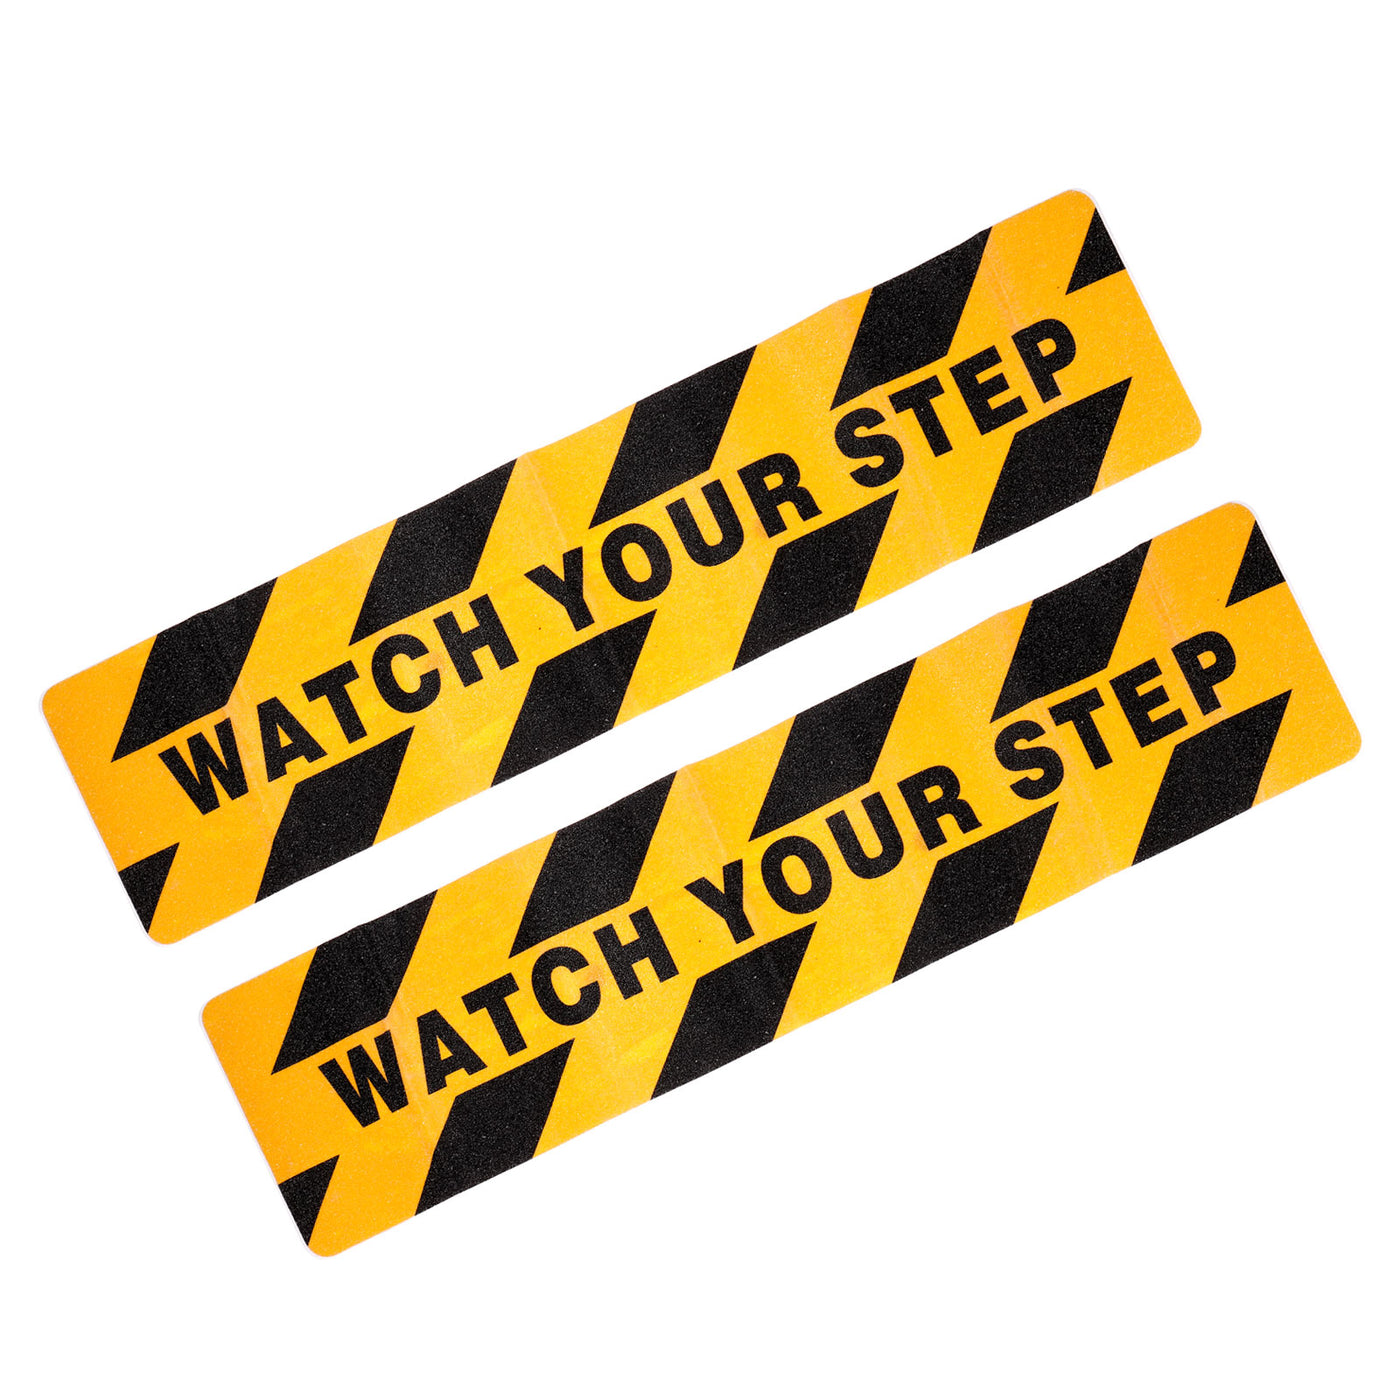 Harfington 6" x 24" Watch Your Step Warning Sticker, 2 Pack Adhesive Abrasive Non Slip Tape for Wet Surface Stair Floor Caution